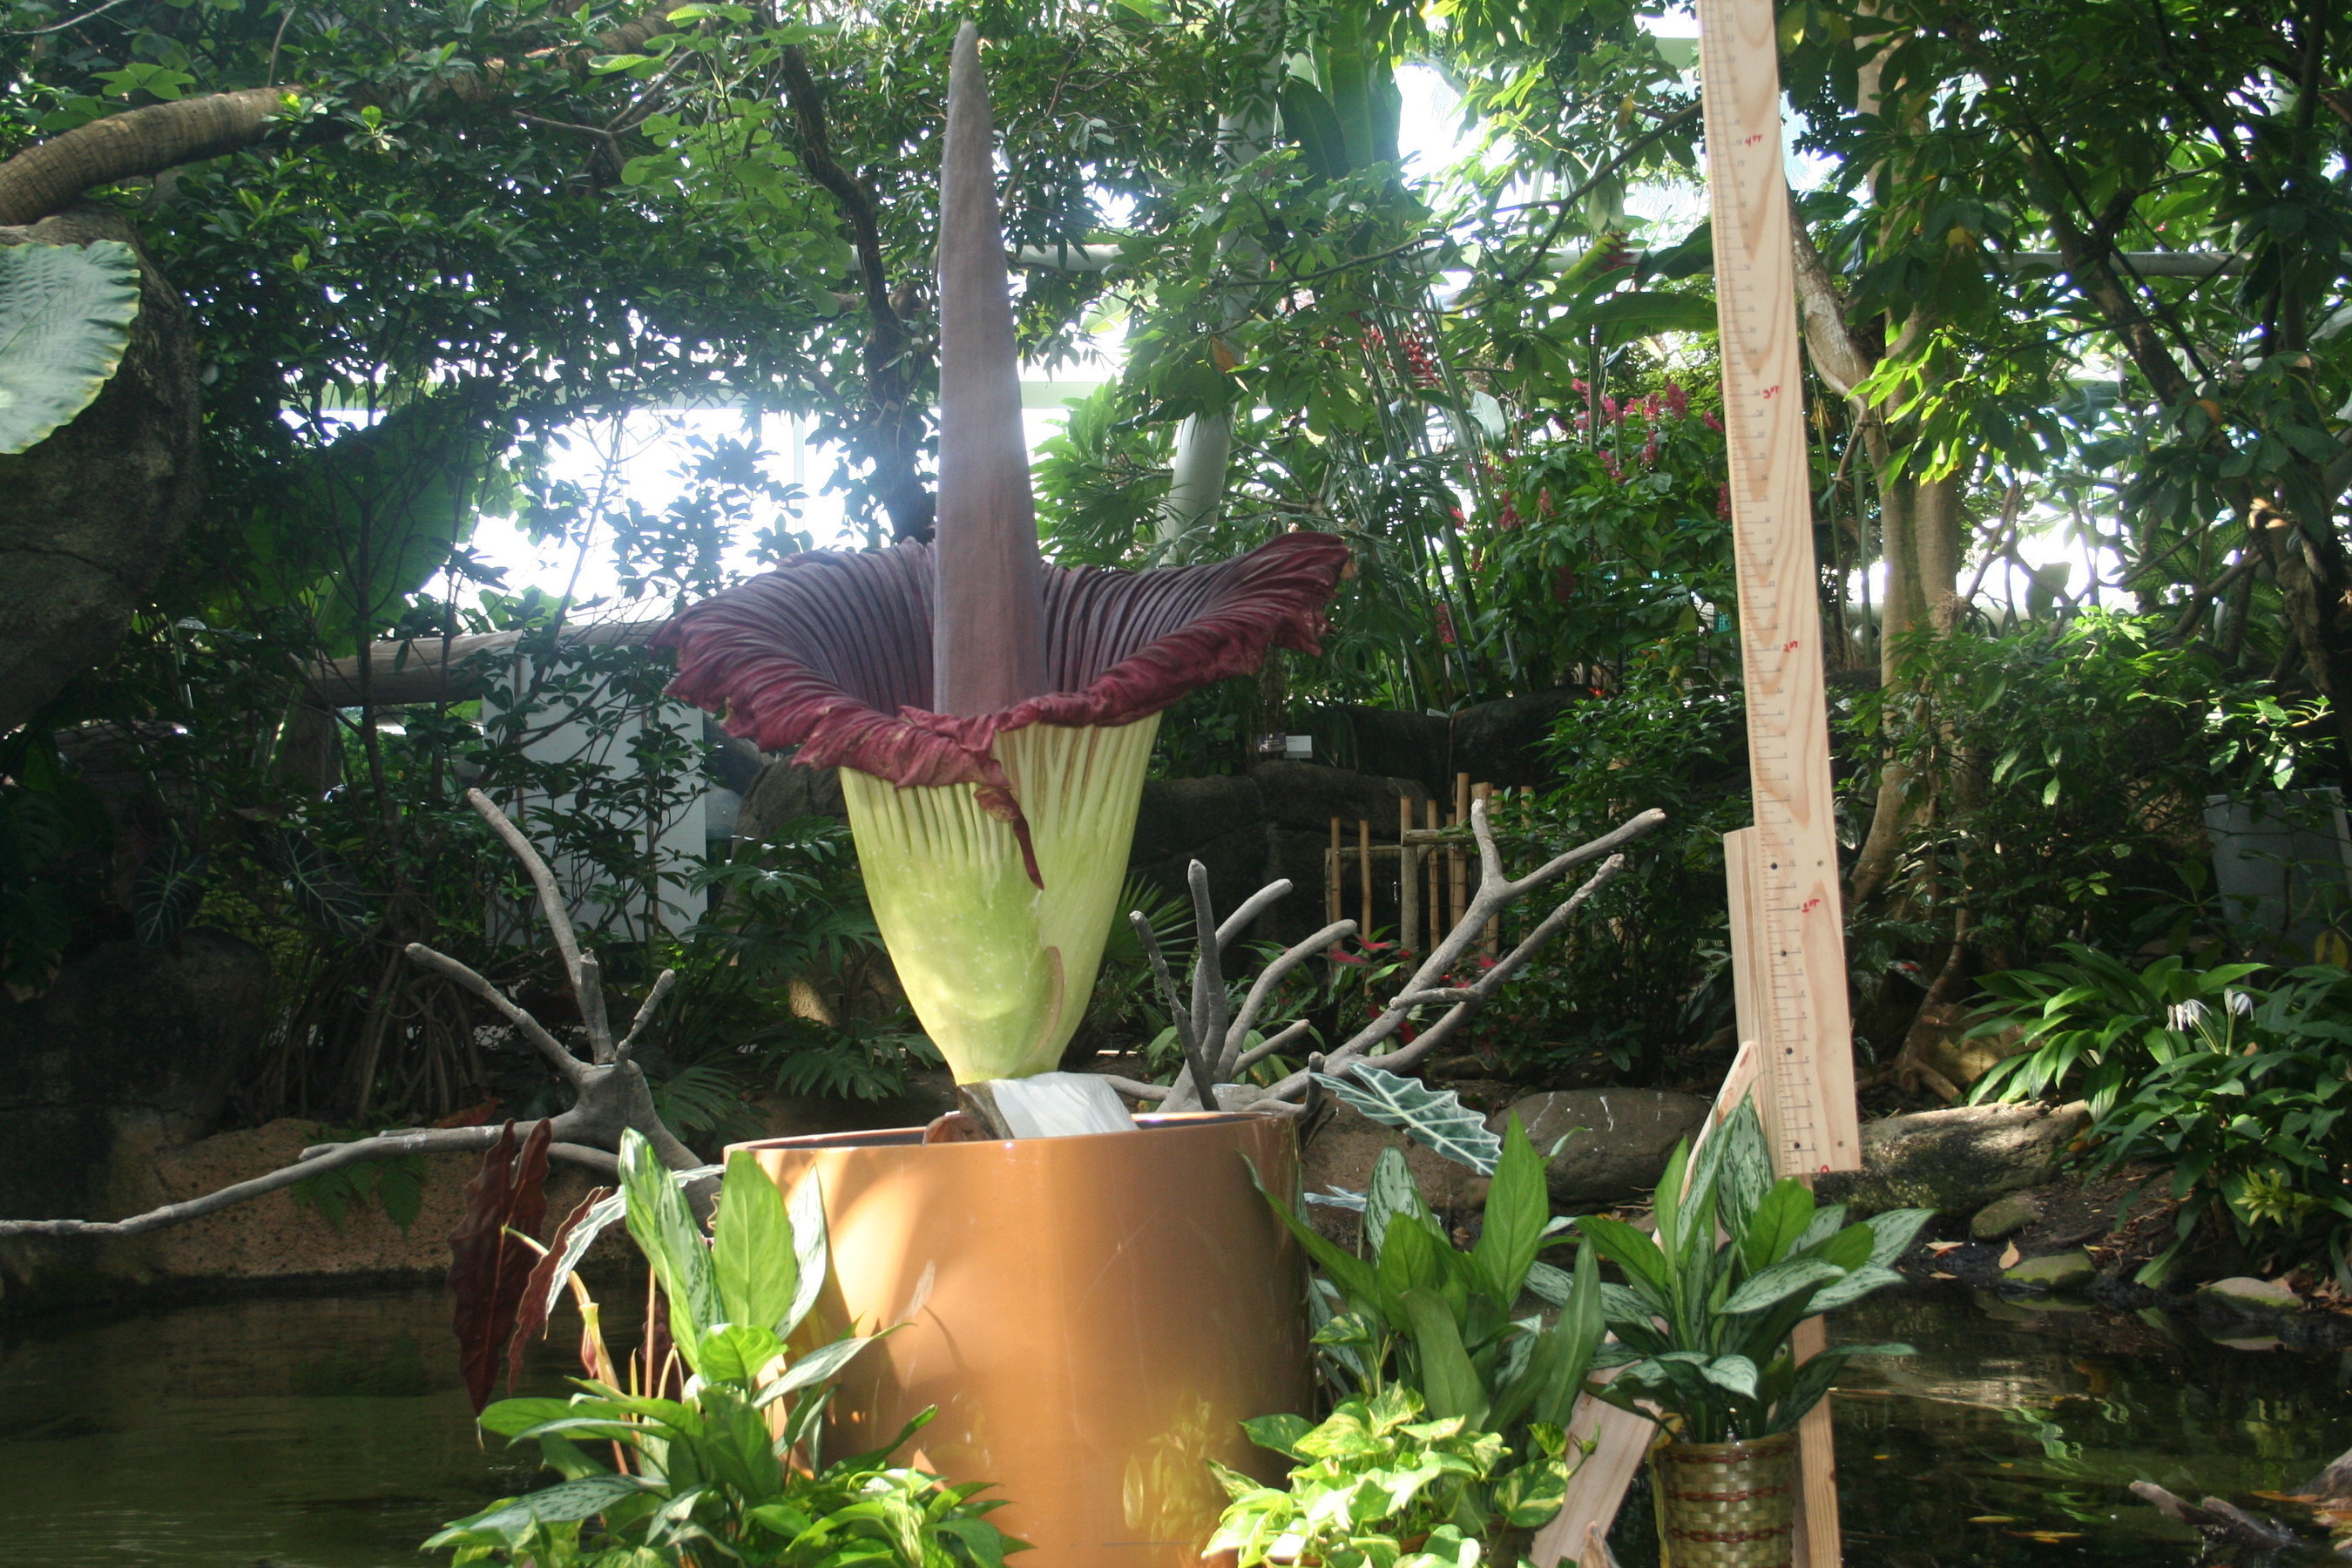 "Morticia" the Corpse Flower is expected to bloom at Moody Gardens in Galveston, TX within the next week. She will be approximately 10 ft. tall with a powerful stench as shown in this picture from her first bloom in 2012